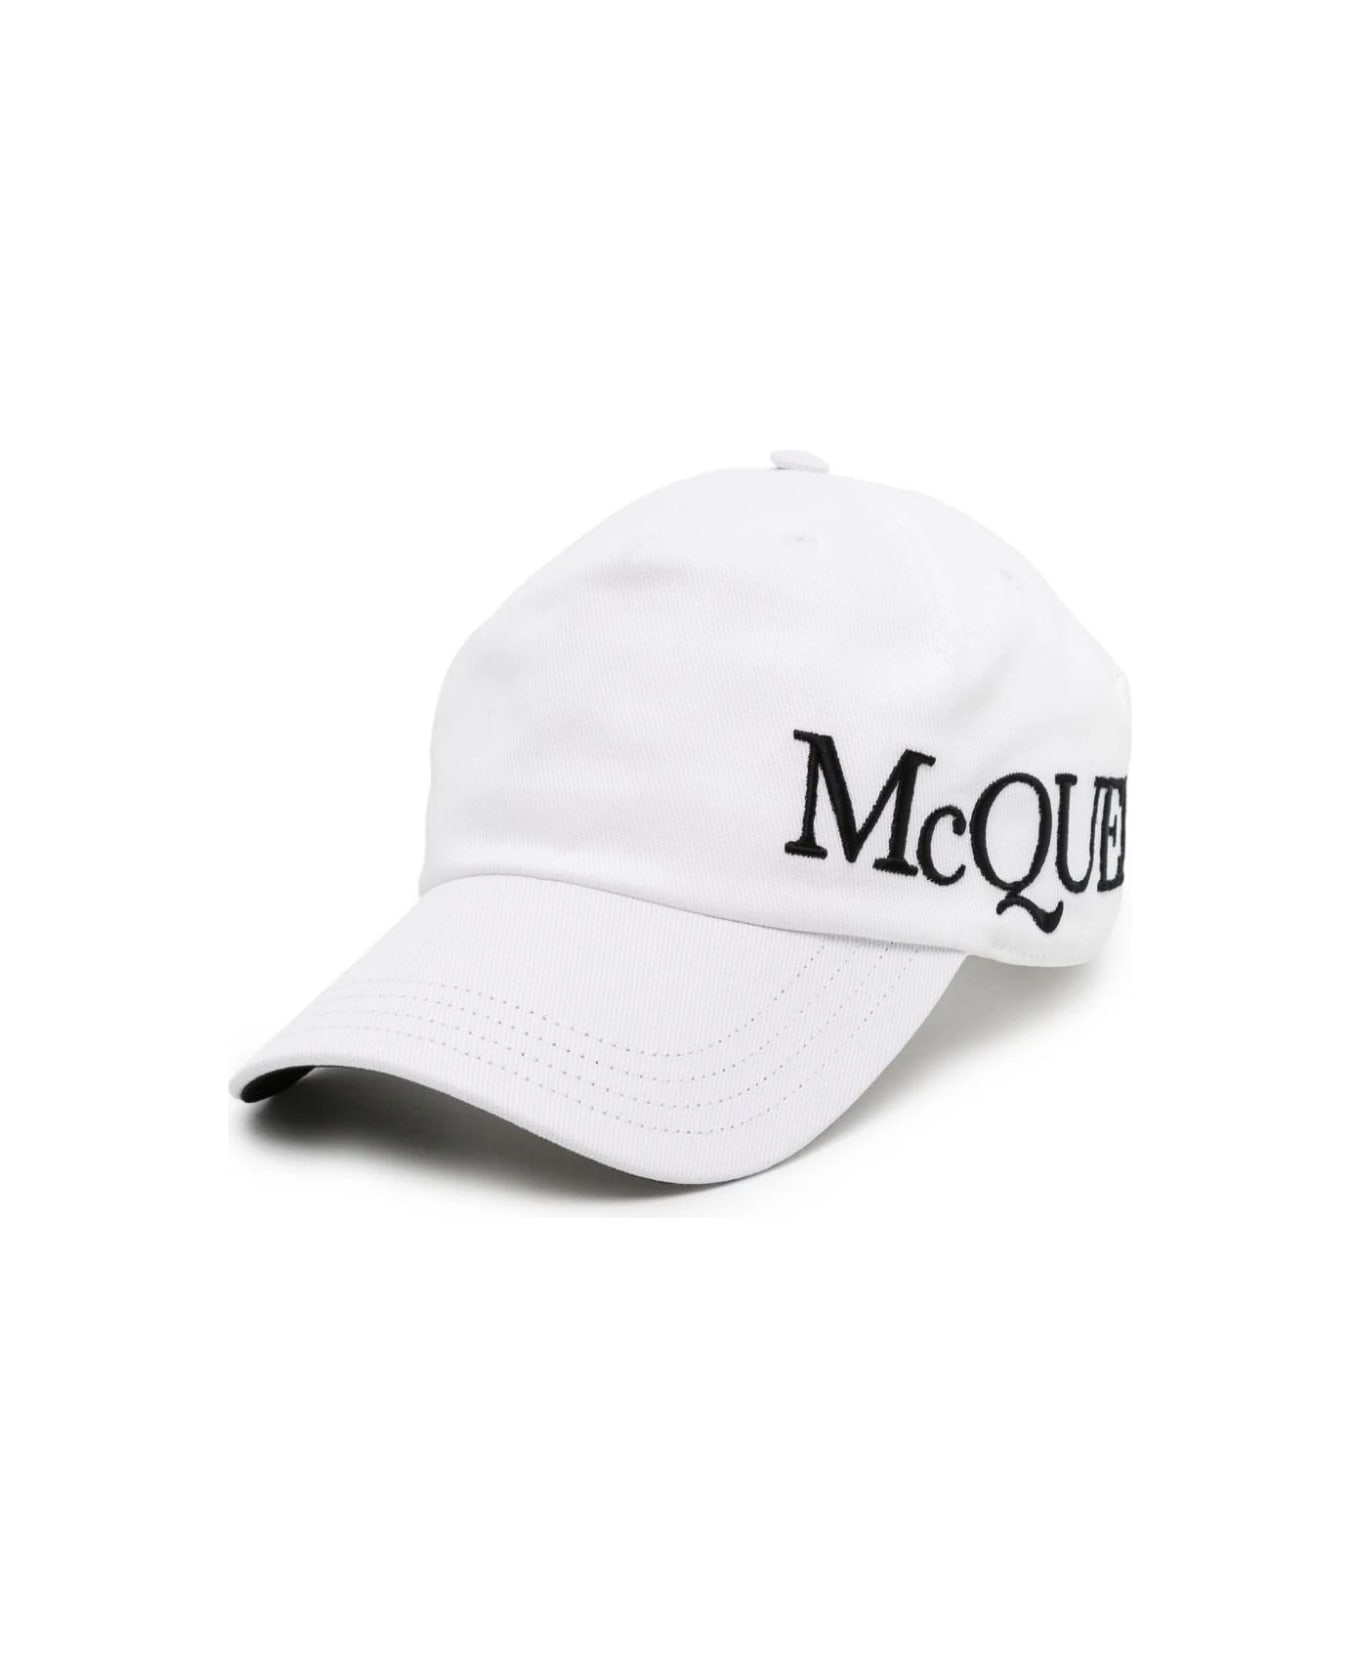 Alexander McQueen White Baseball Peppa hat With Mcqueen Embroidery - White